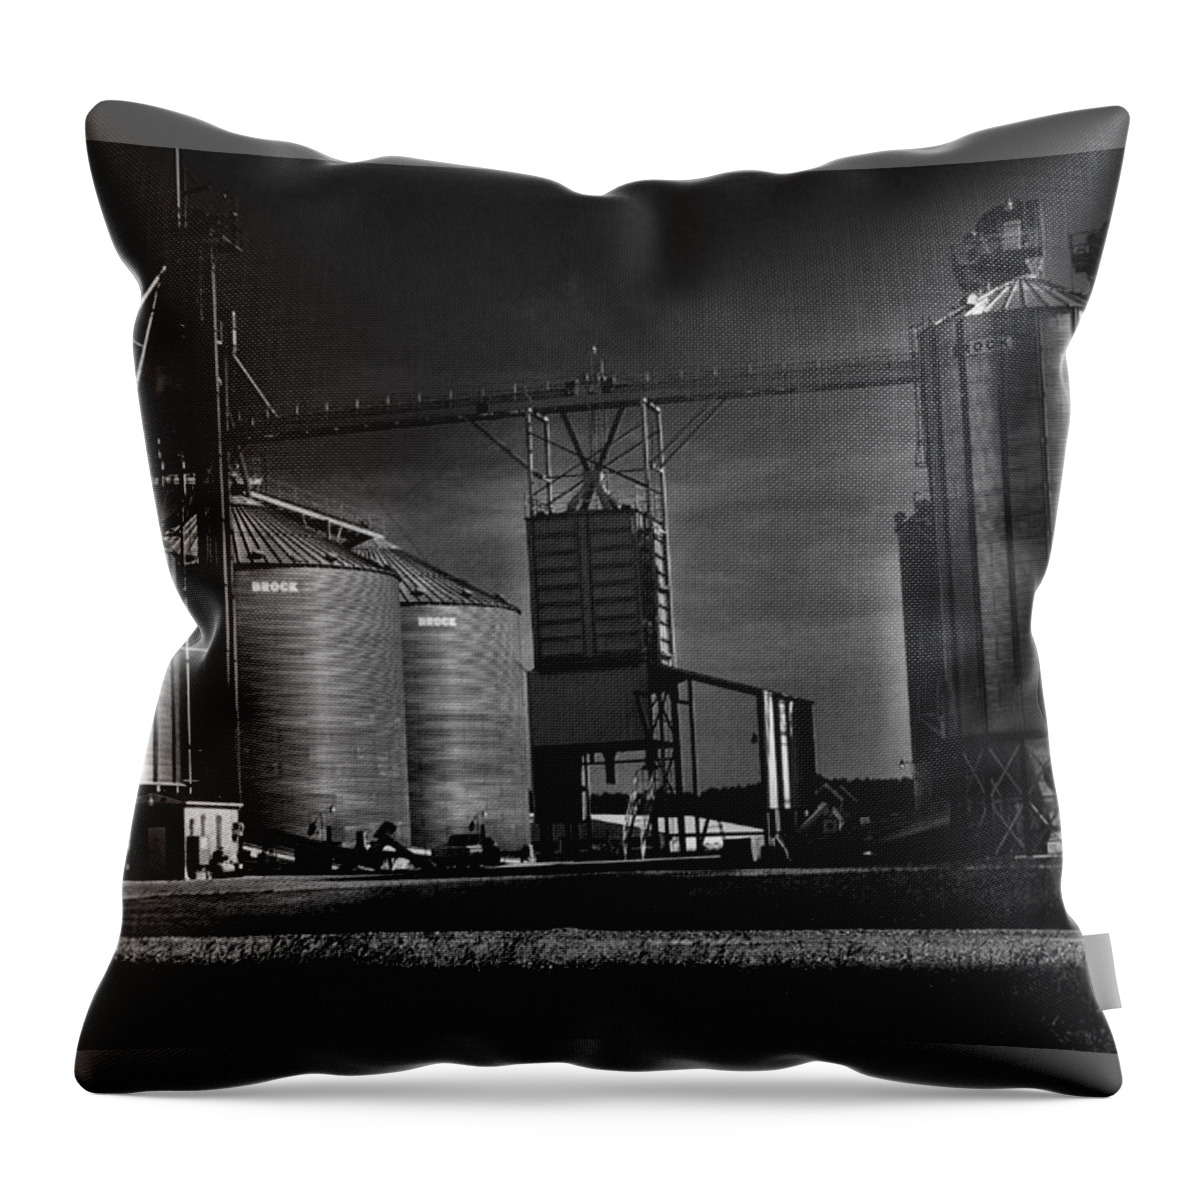 Black And White Throw Pillow featuring the photograph In The Still- Black And White by Adrian De Leon Art and Photography